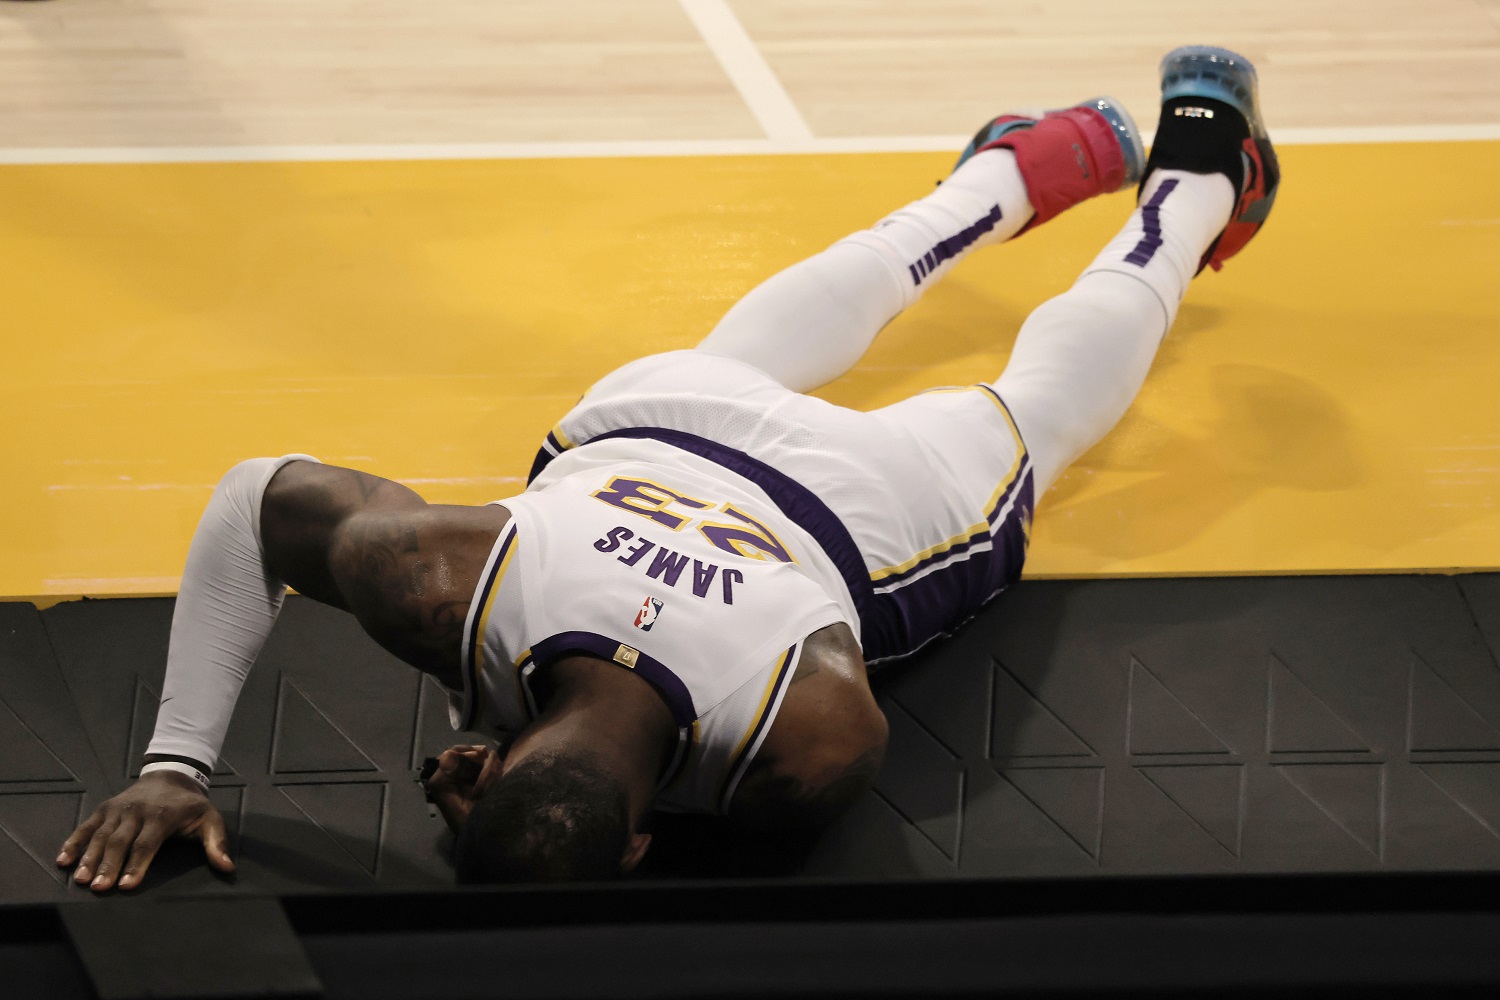 Los Angeles Lakers star LeBron James reacts to an his injury during a game against the Atlanta Hawks on March 20, 2021.